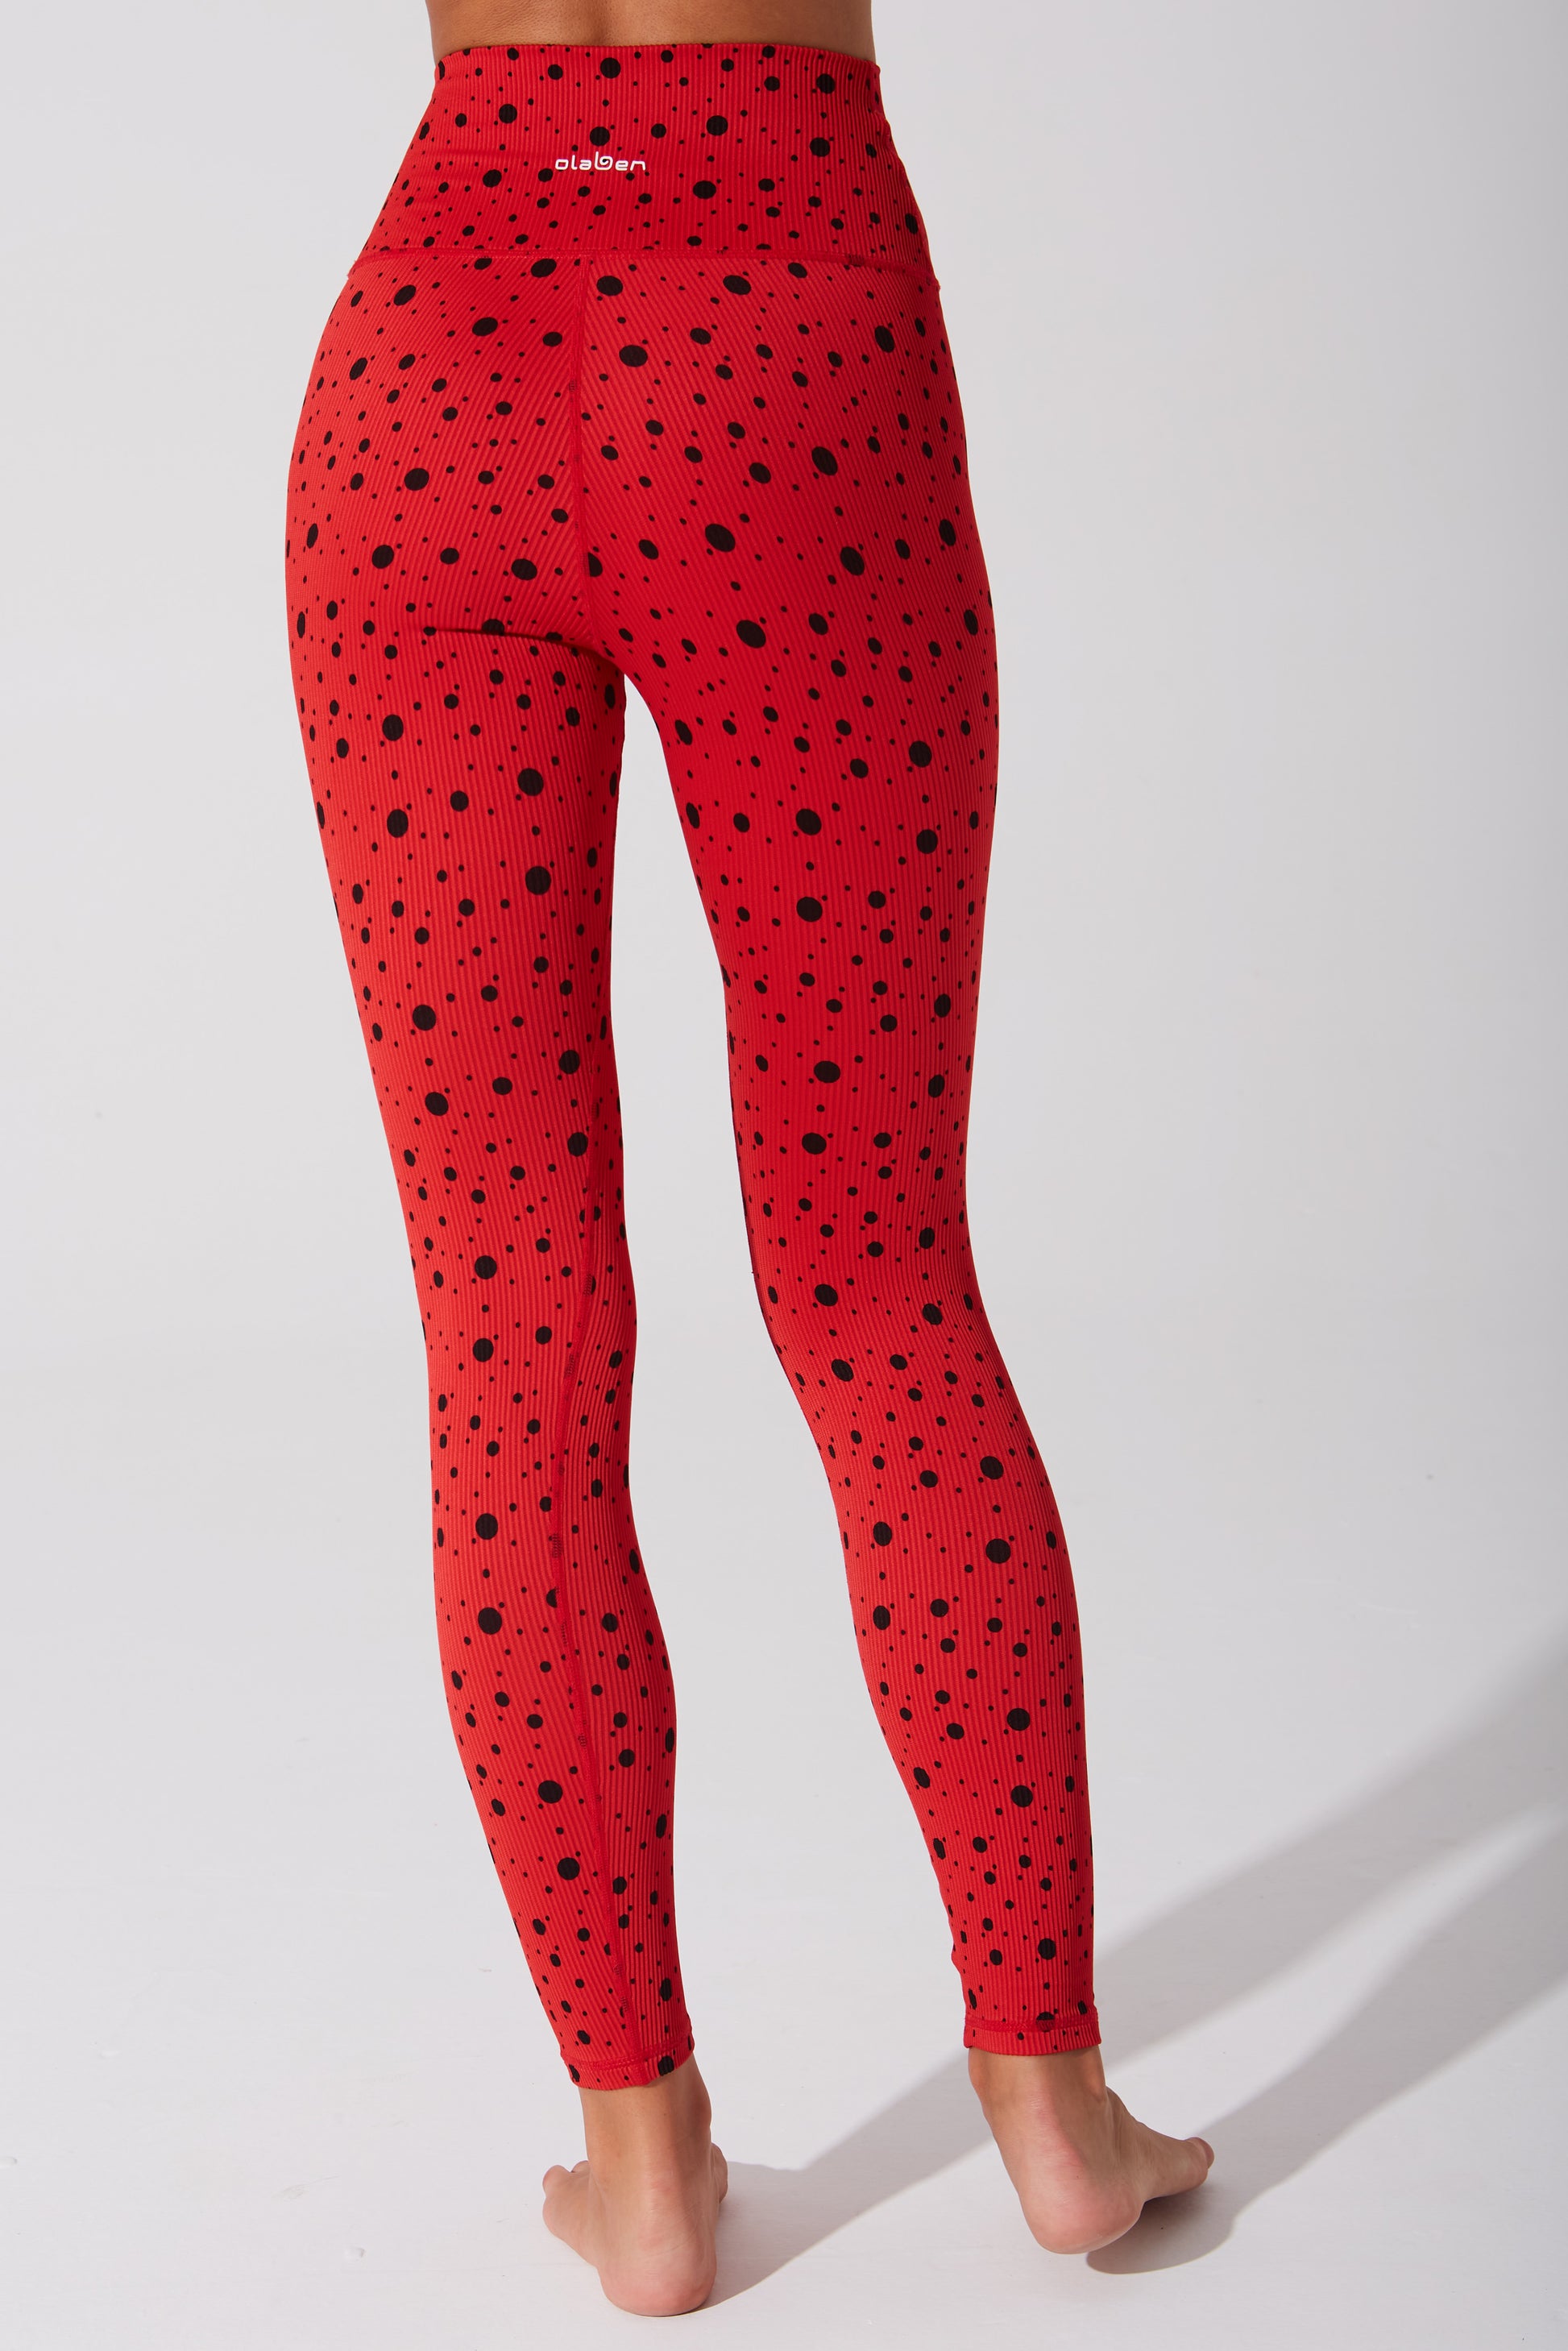 Vibrant red polka dot leggings for women with a playful beetle design - OW-0023-WLG-OR.